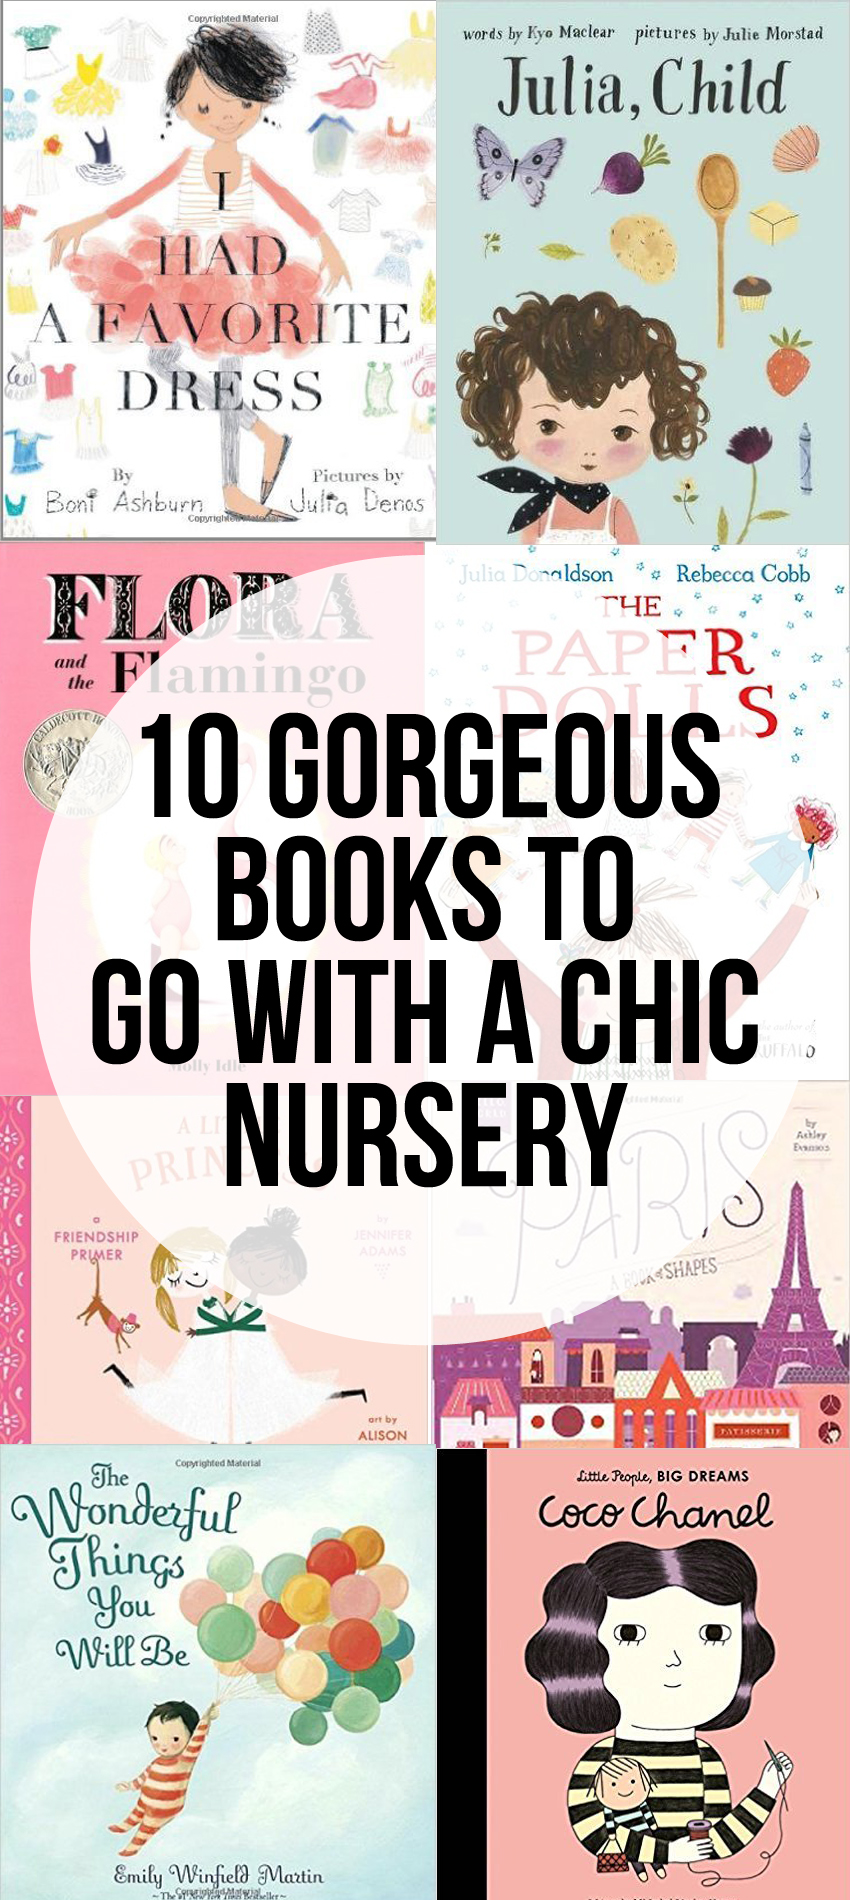 10 Gorgeous Books To Go With A Chic Nursery - great for decorating a little girls room (plus their just great books!).